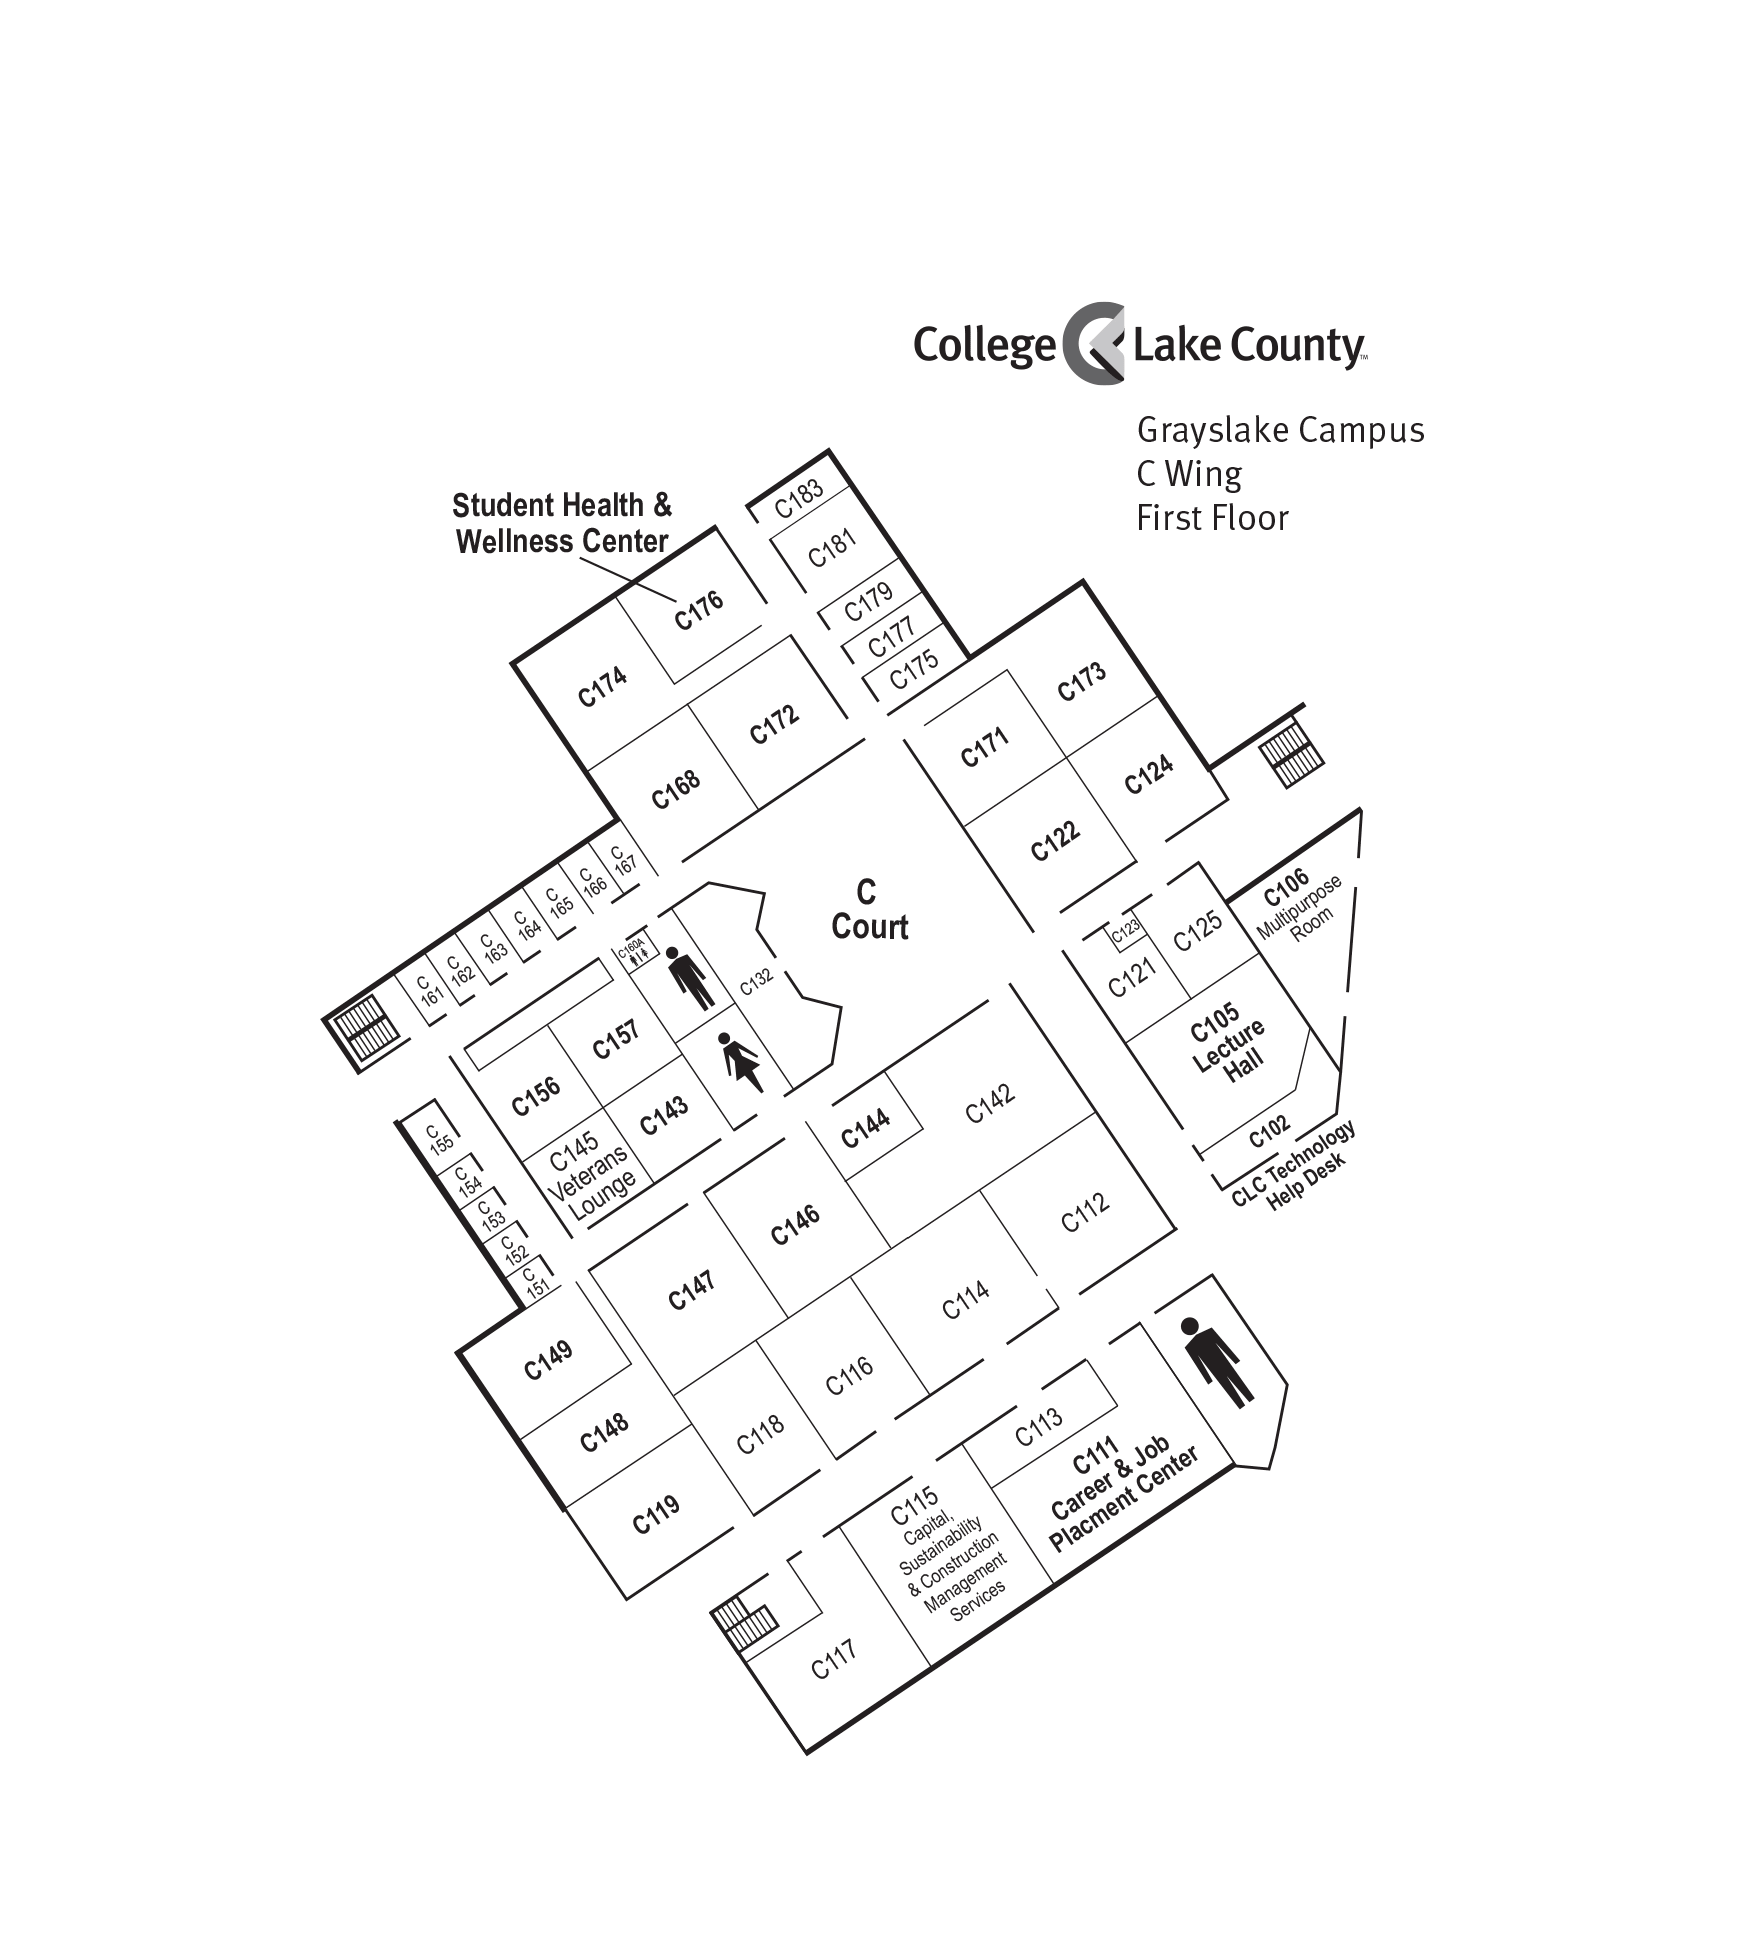 C wing first floor map